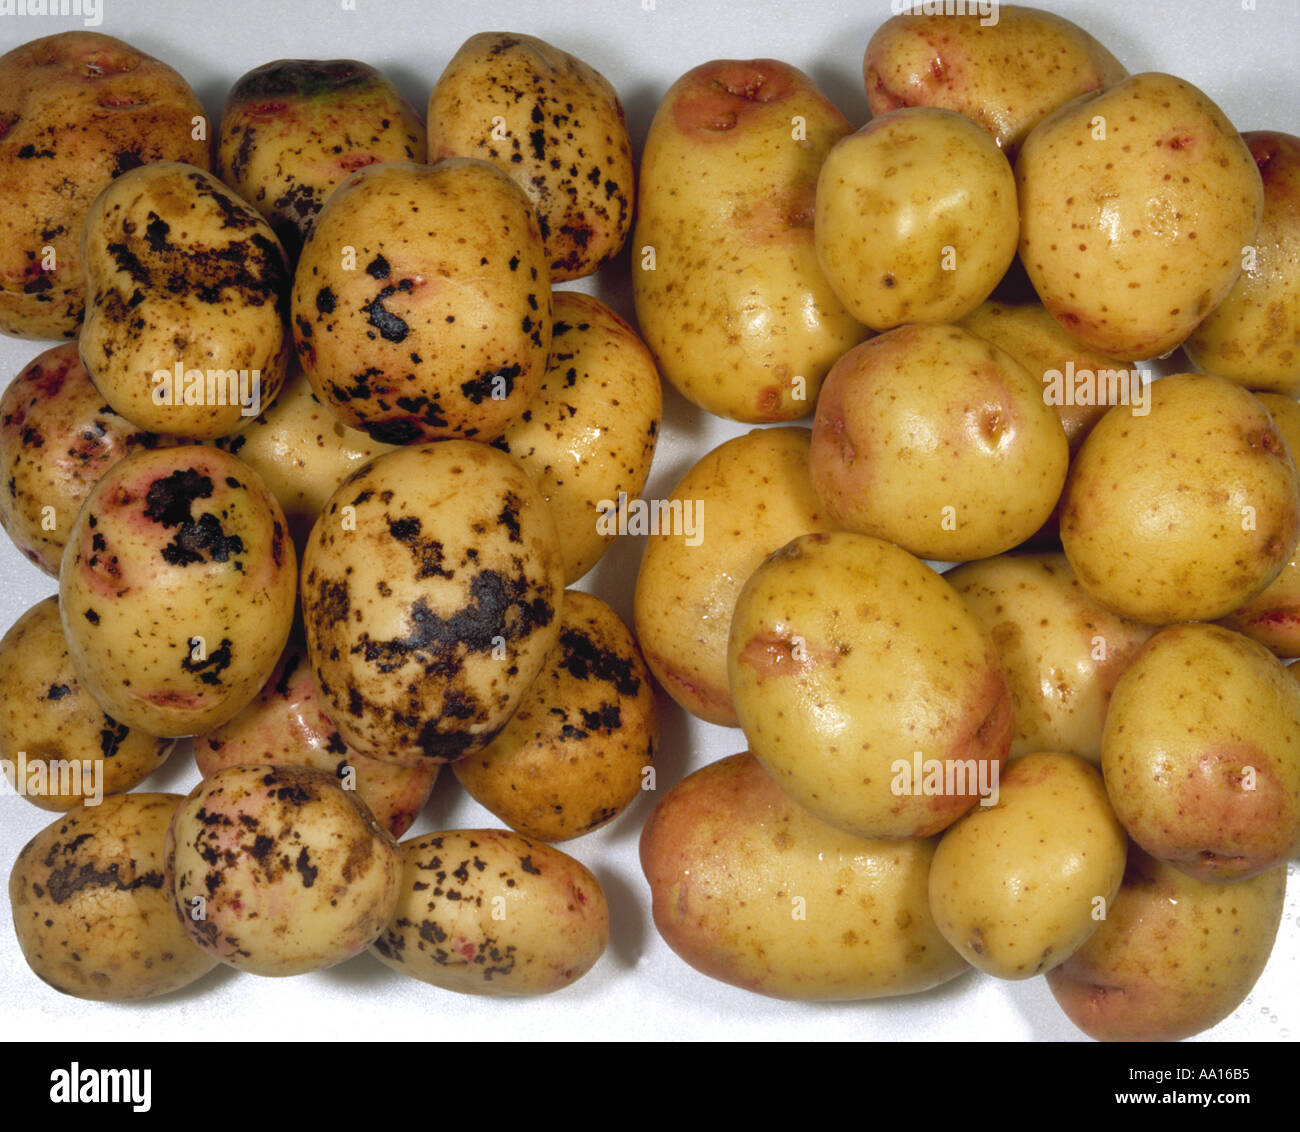 black scurf Rhizoctonia solani on potatoes compared to healthy uninfected crop on the right Stock Photo